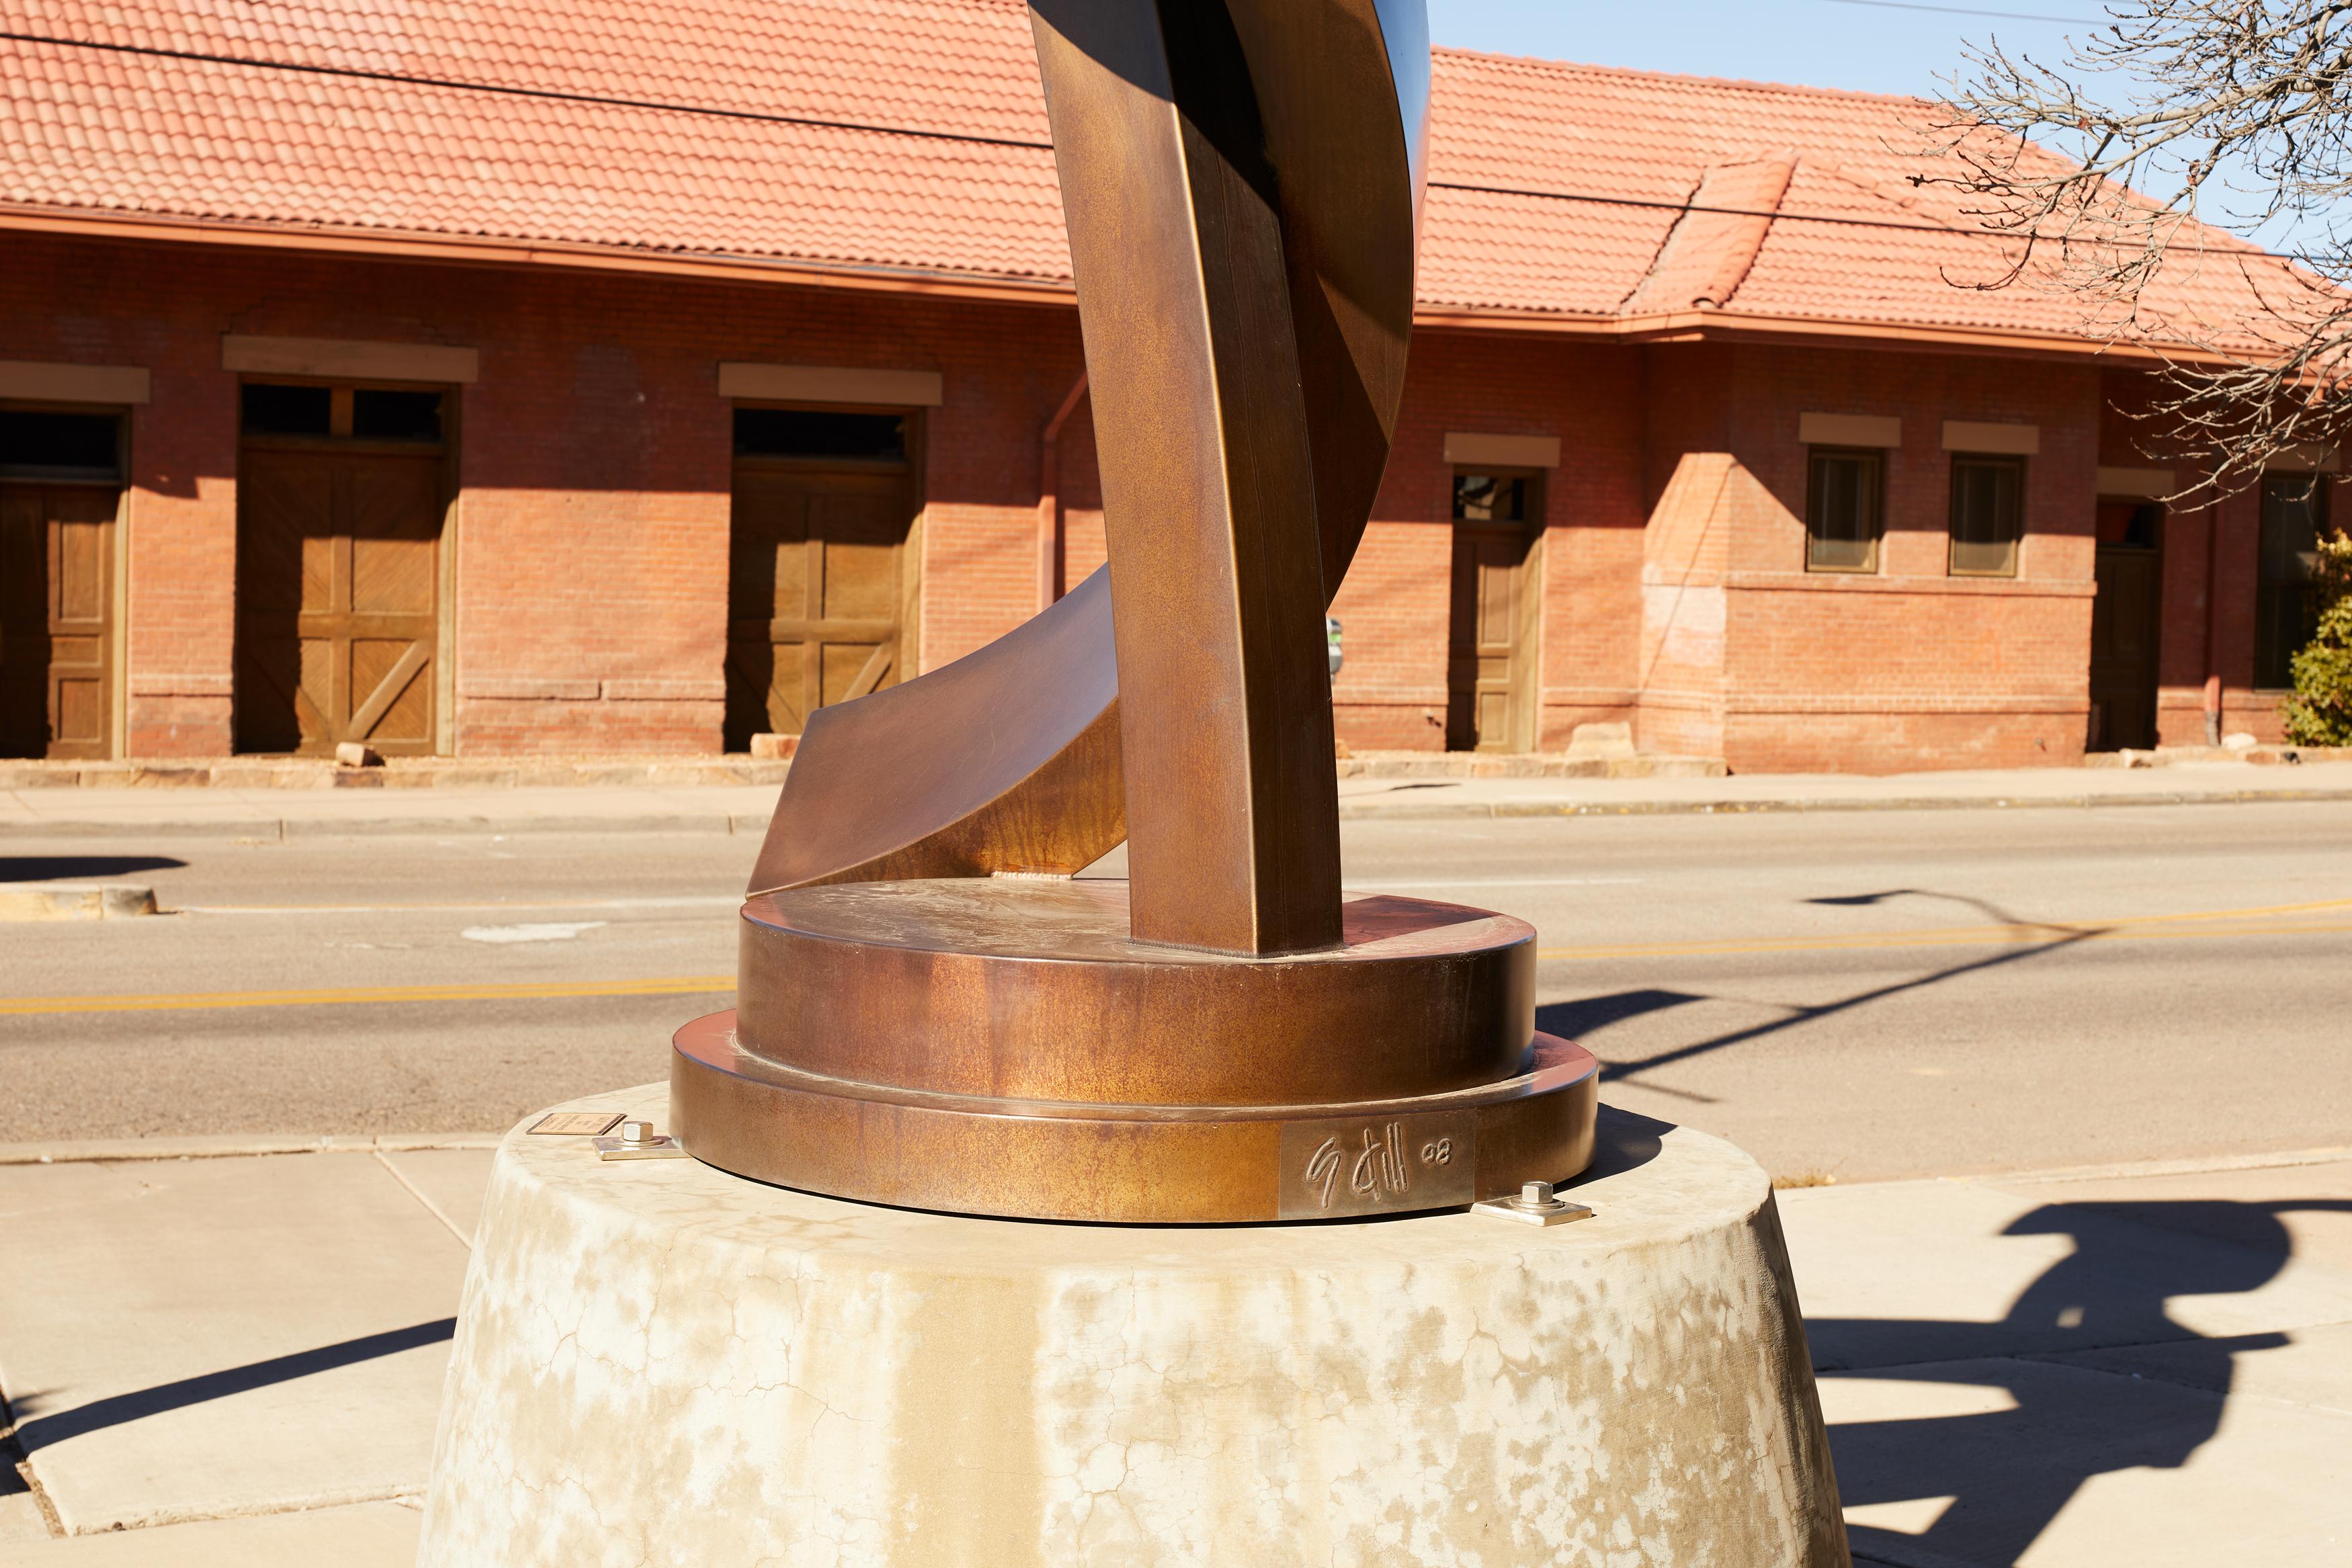 Boon is a 2008 bronze sculpture by Guy Dill. The refinement and poise of Guy Dill's bronze work is effortlessly balanced with the industrial and modern feel of the metal sculpture. Boon is signed by Guy Dill. 